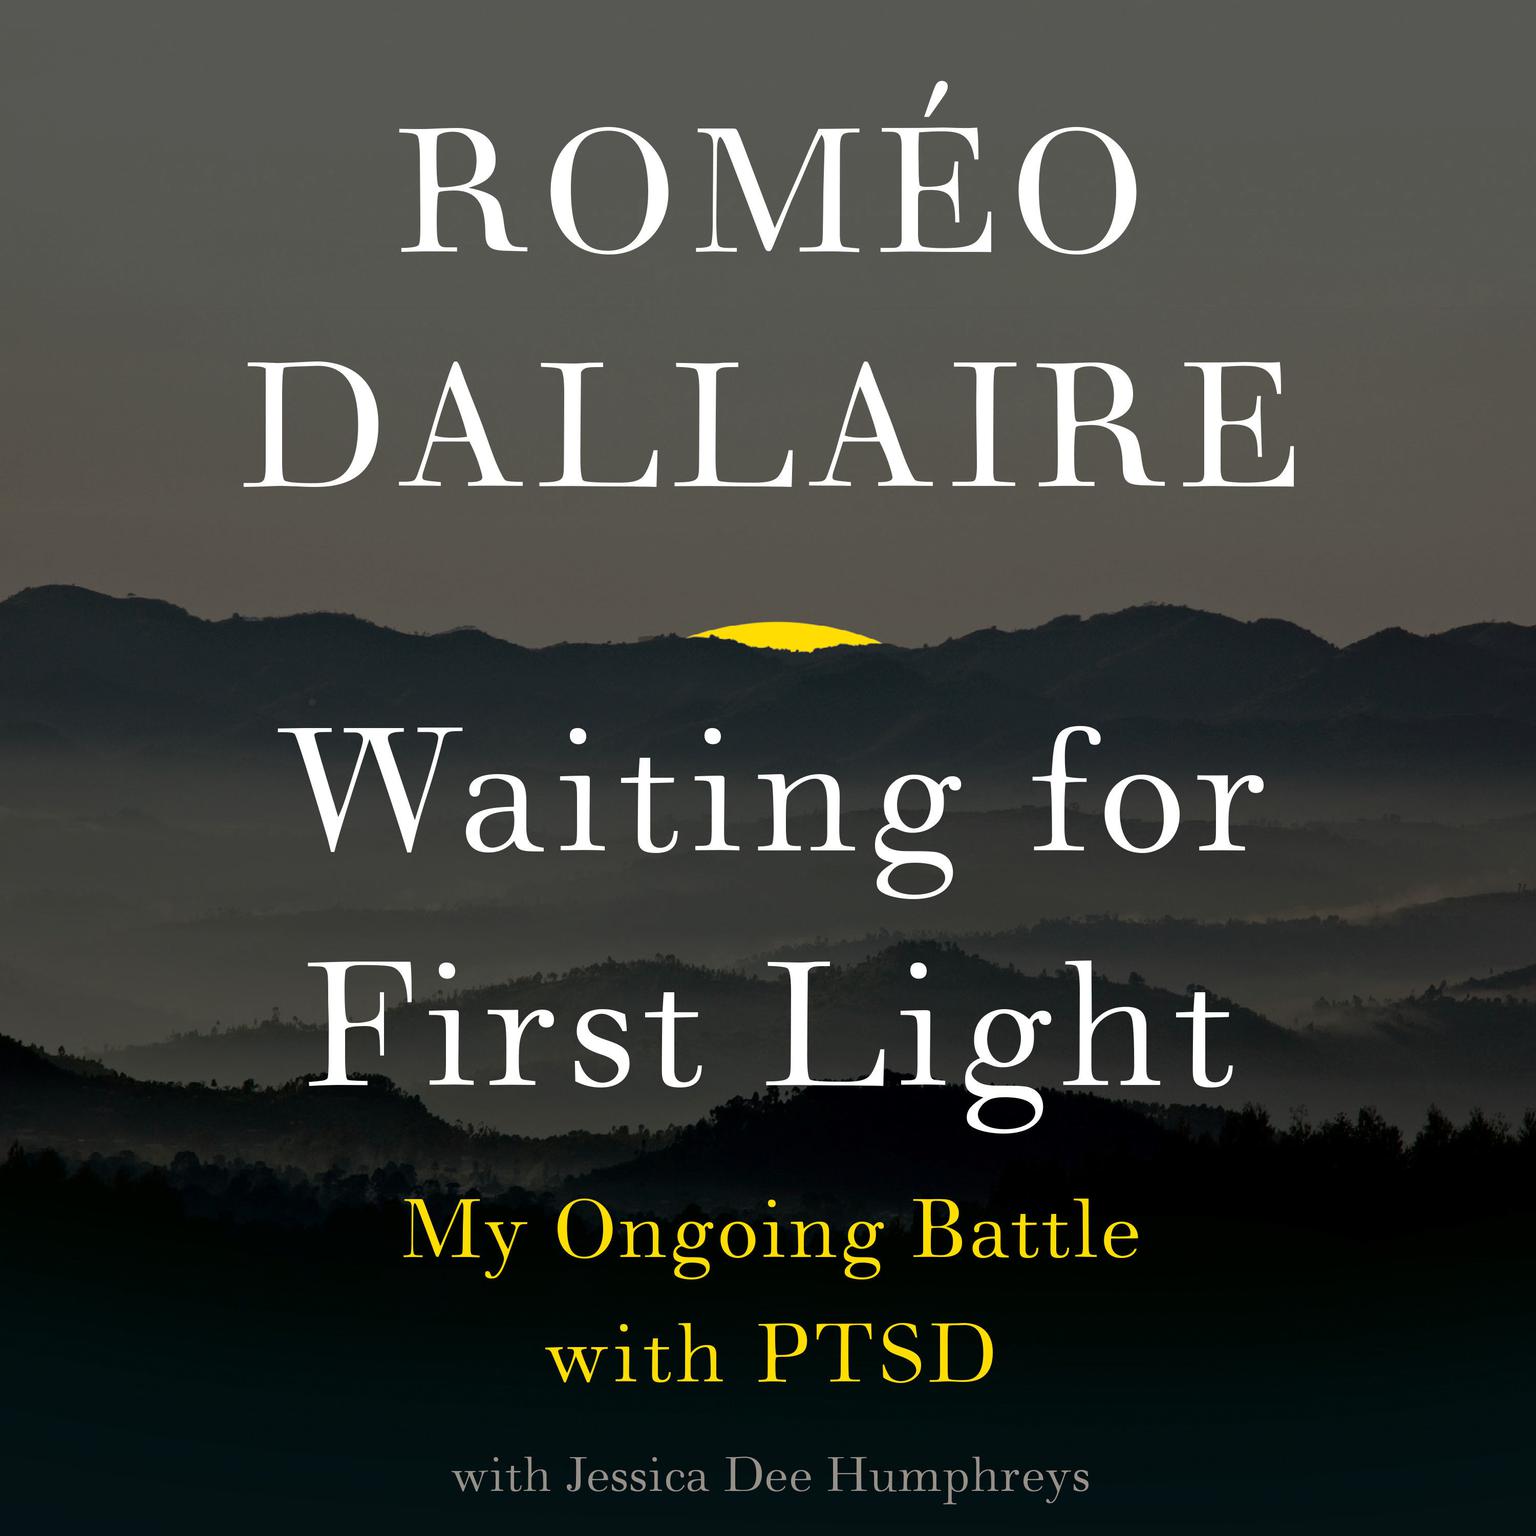 Waiting for First Light: My Ongoing Battle with PTSD Audiobook, by Romeo Dallaire